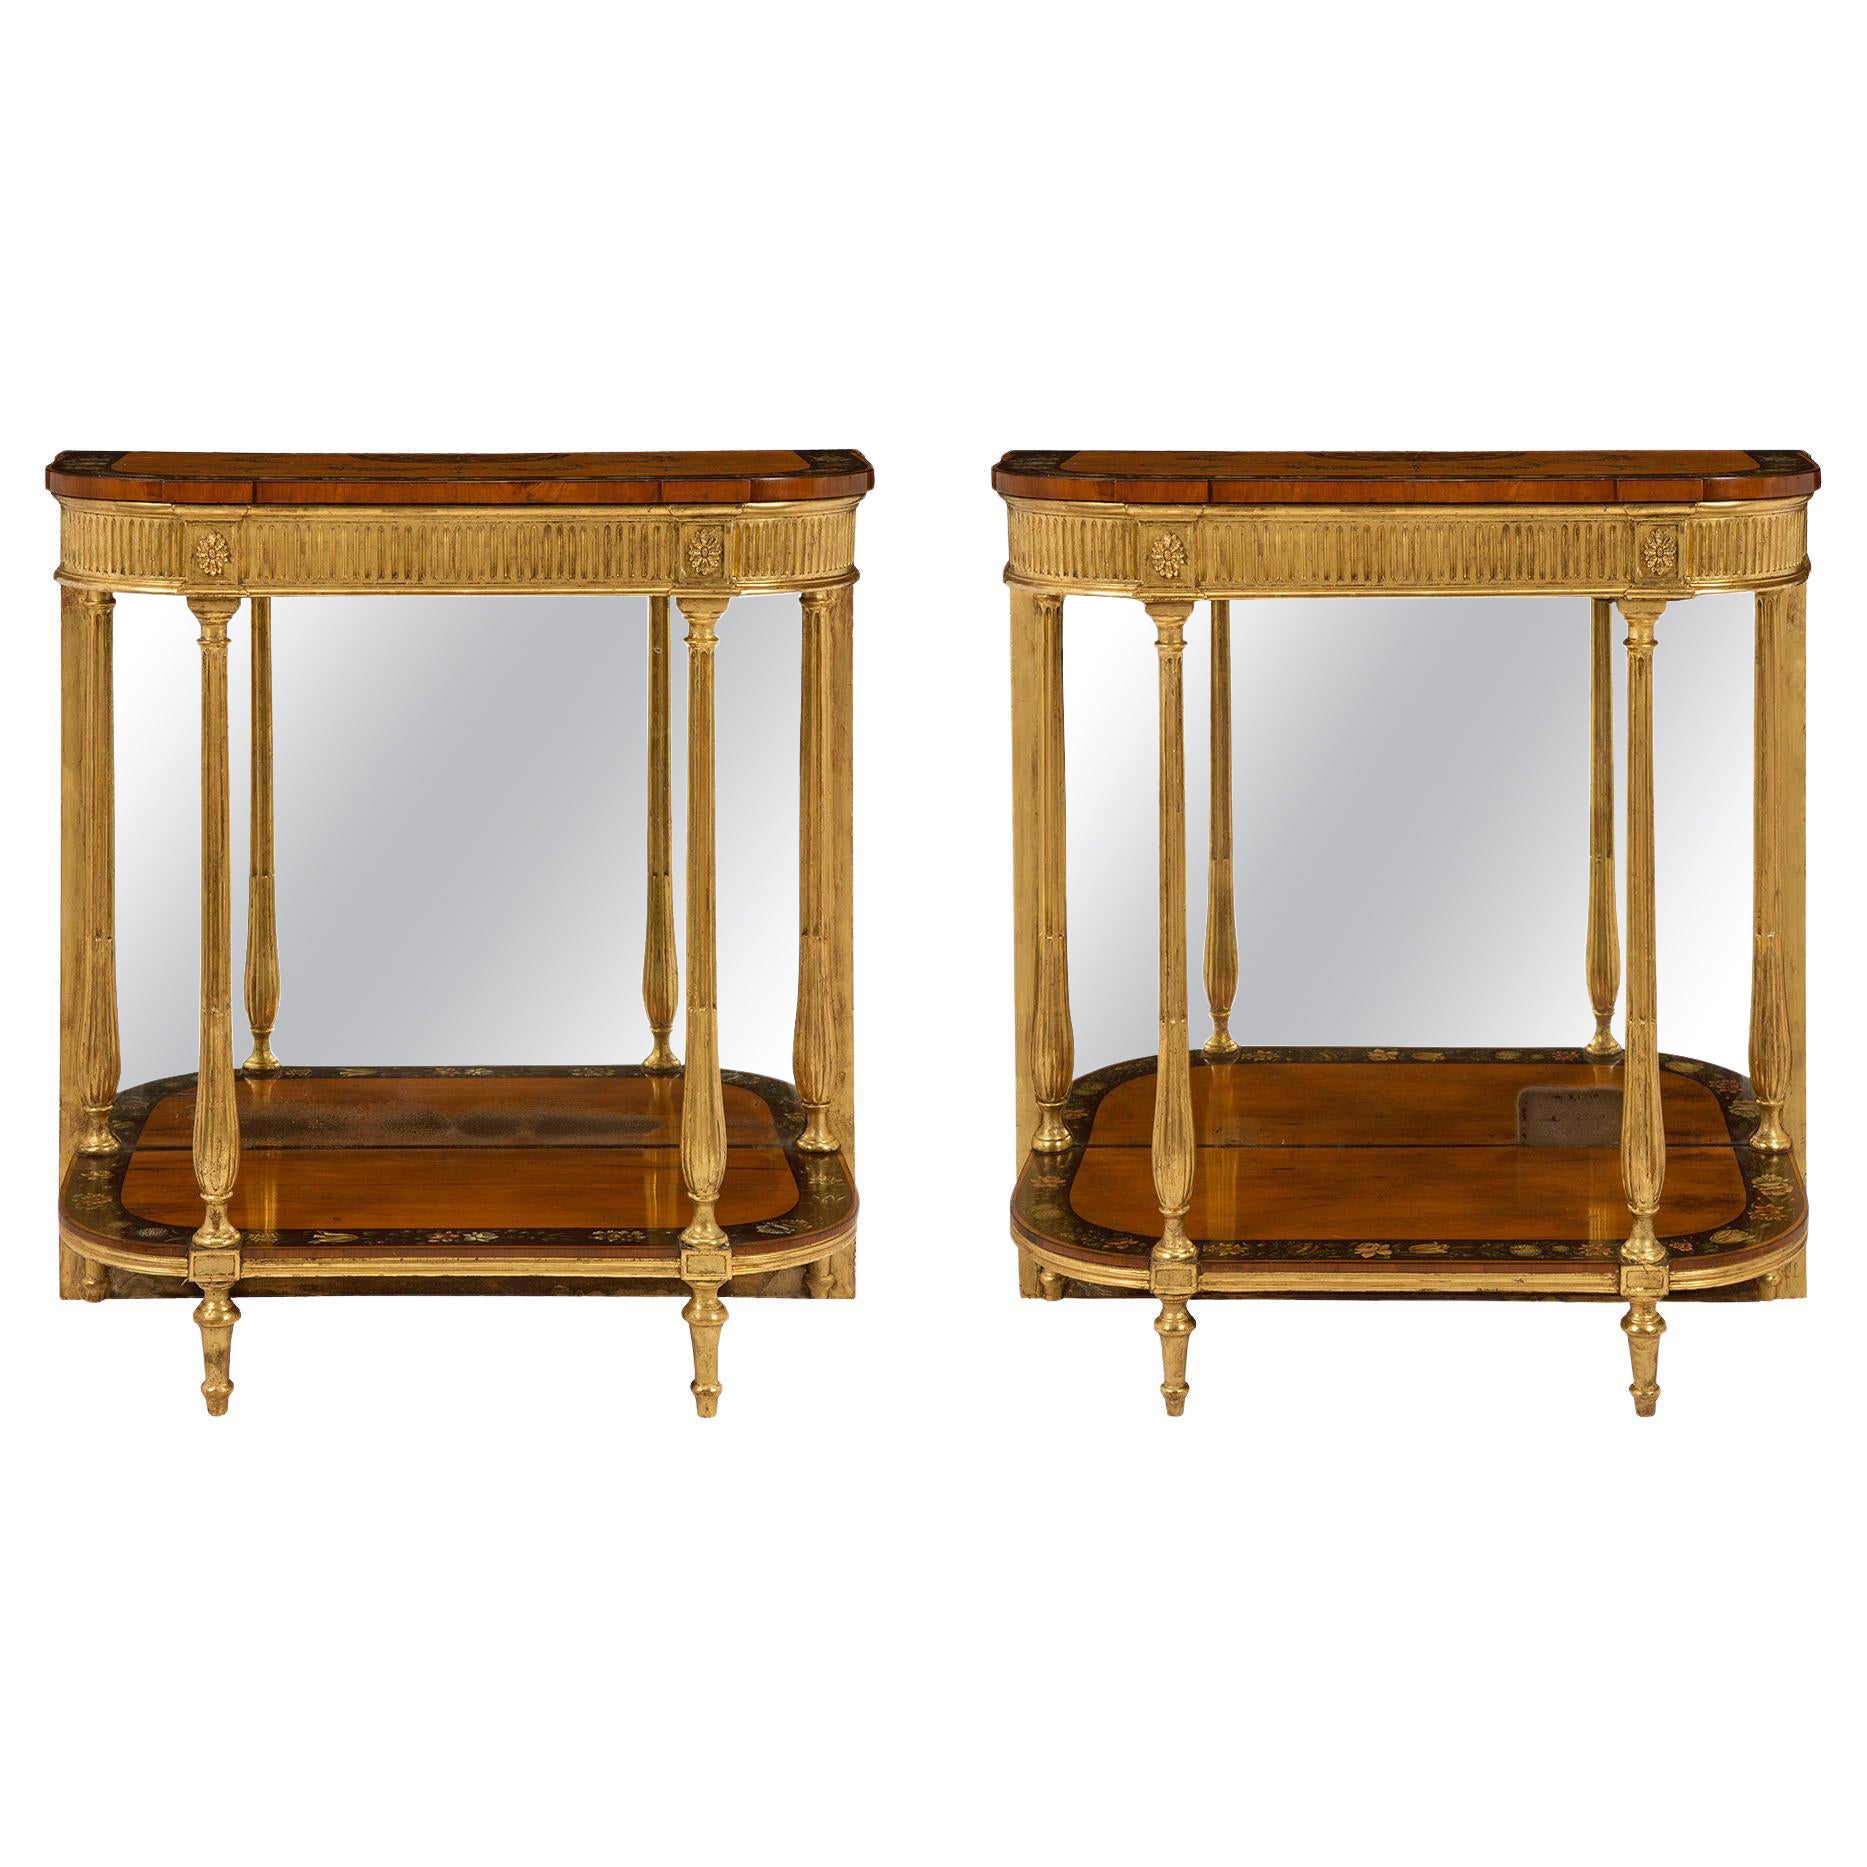 Pair of Early 19th Century Adams Style Console Tables